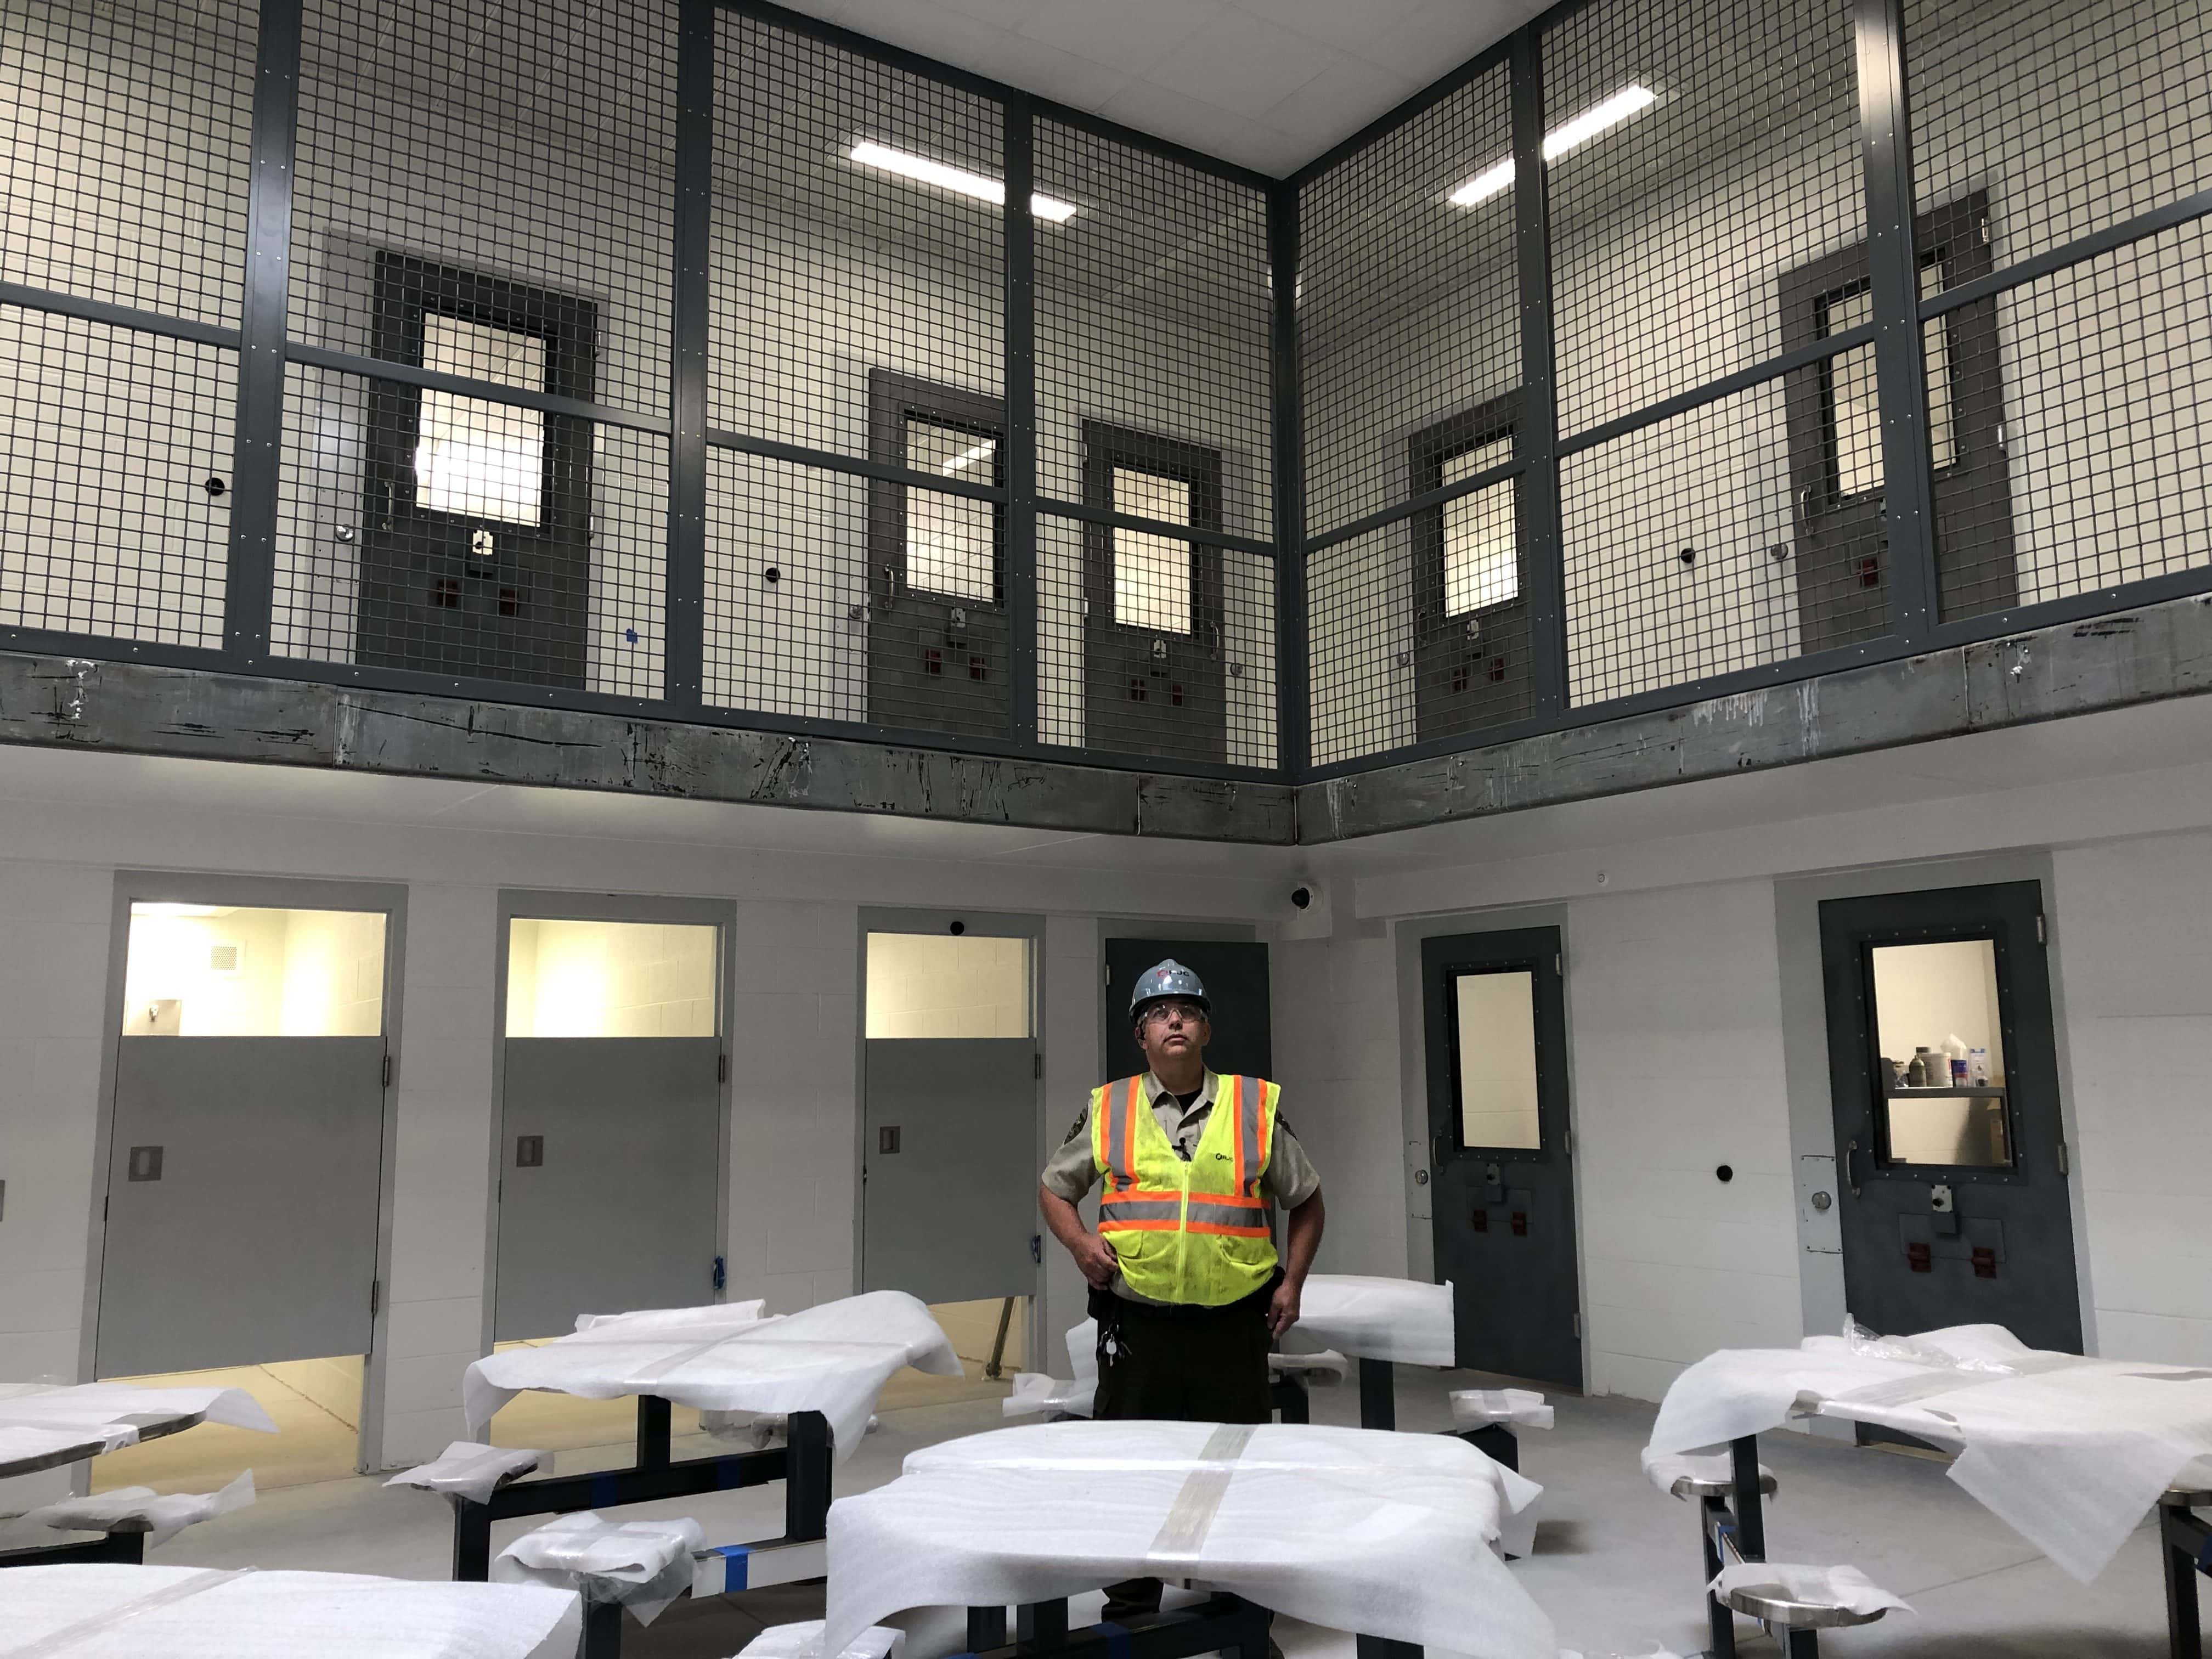 Here's a look at Lee County's new jail facility WGLC